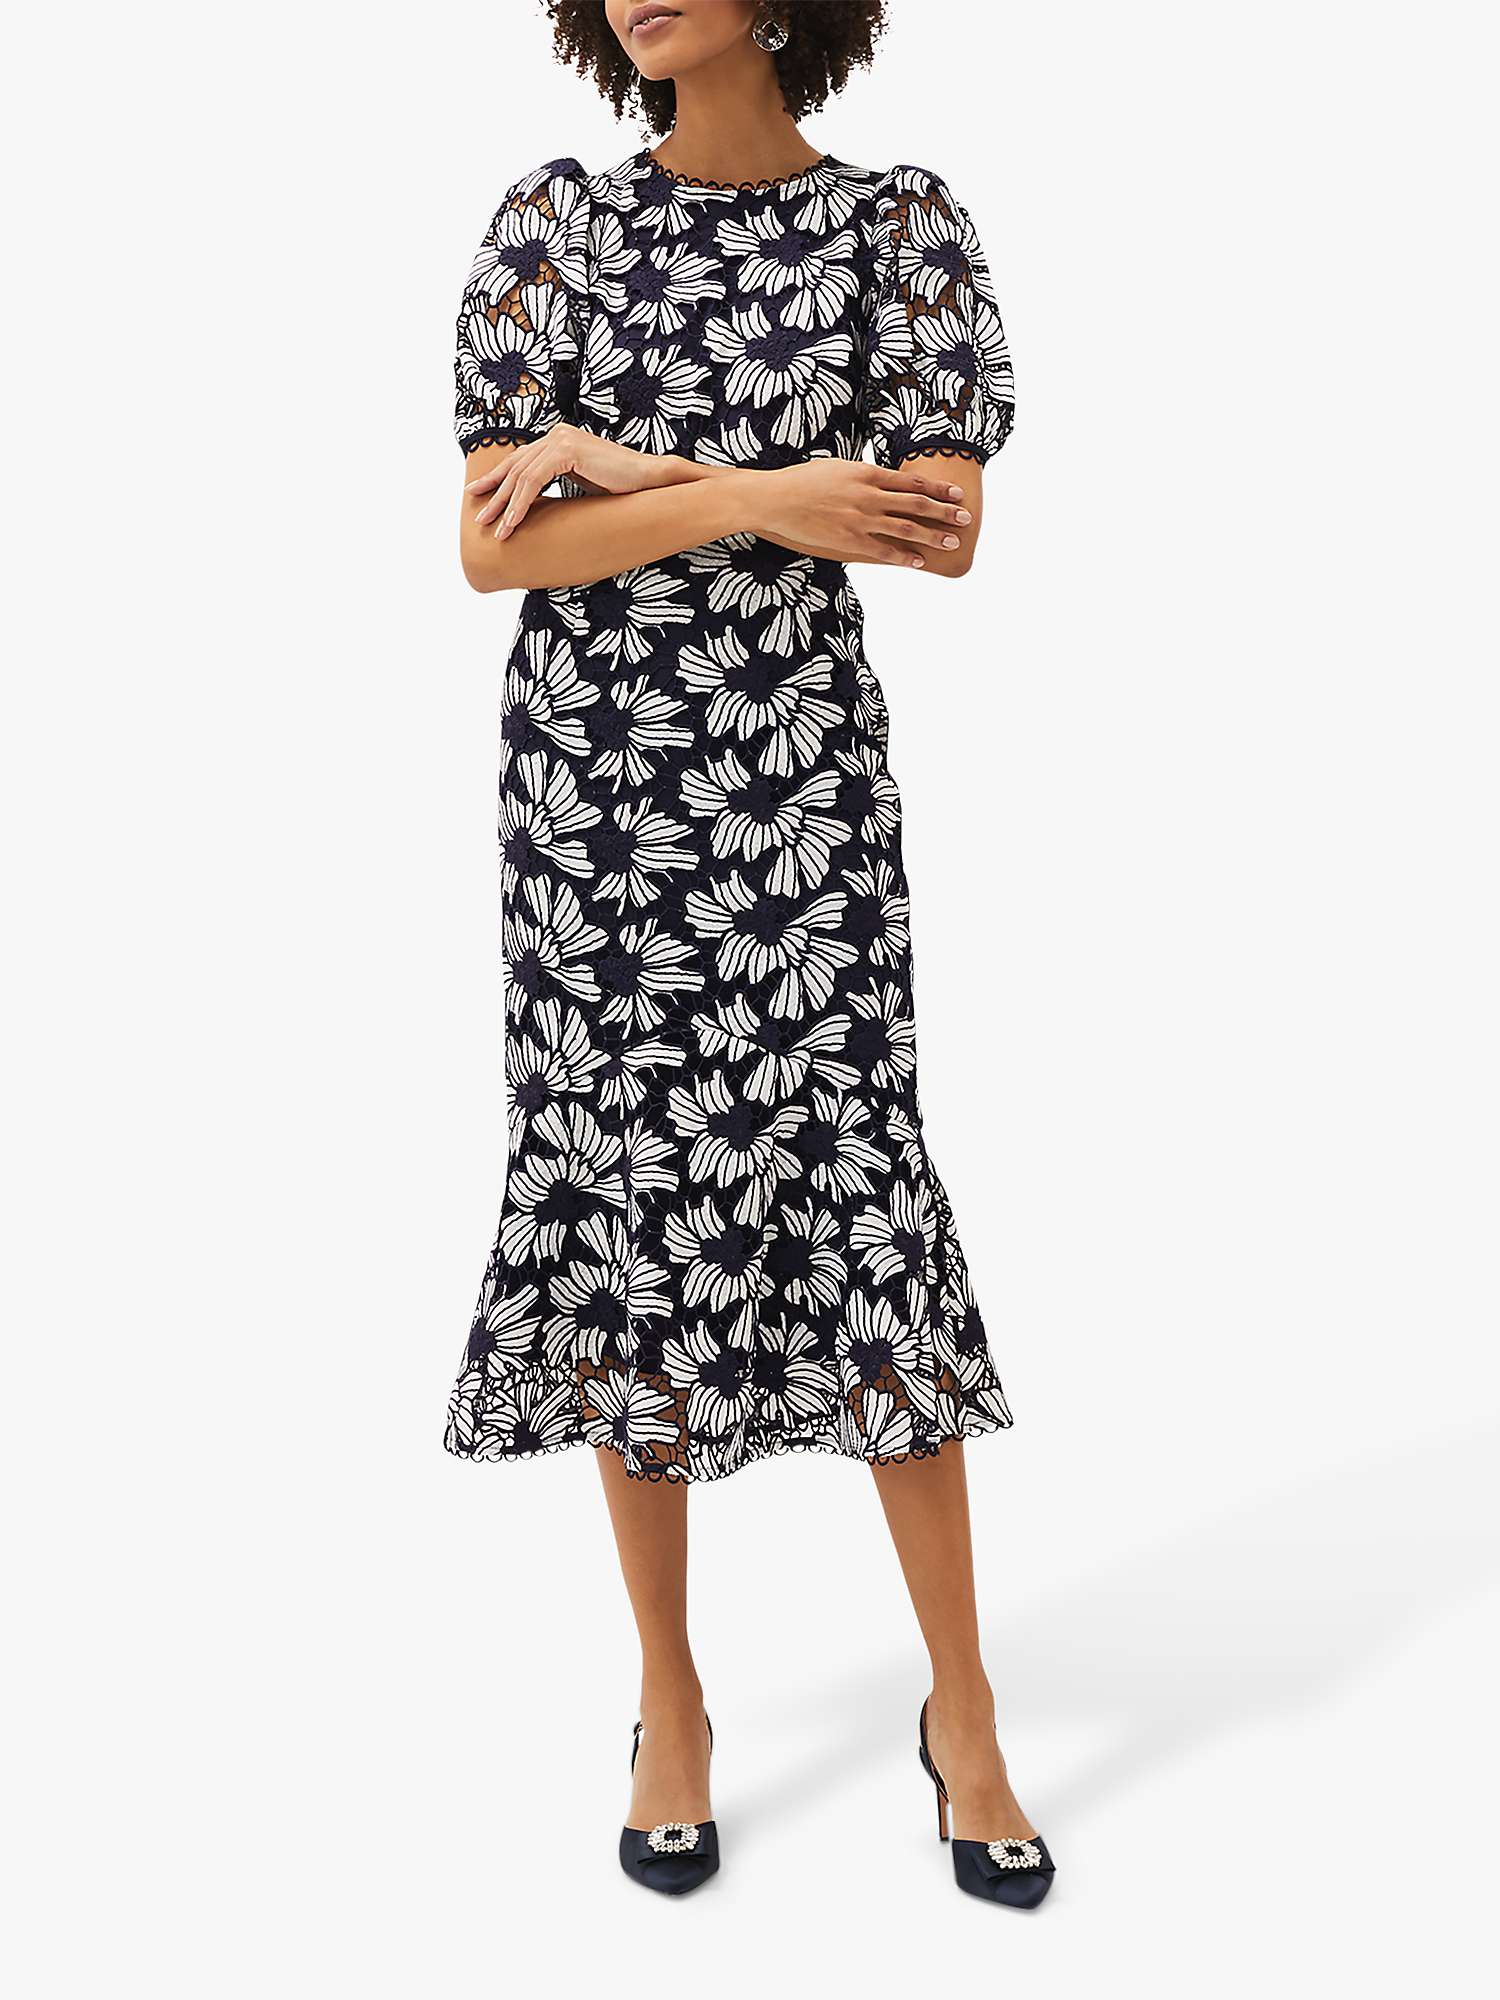 Phase Eight Caitlyn Floral Guipere Lace Dress, Navy/Ivory at John Lewis ...